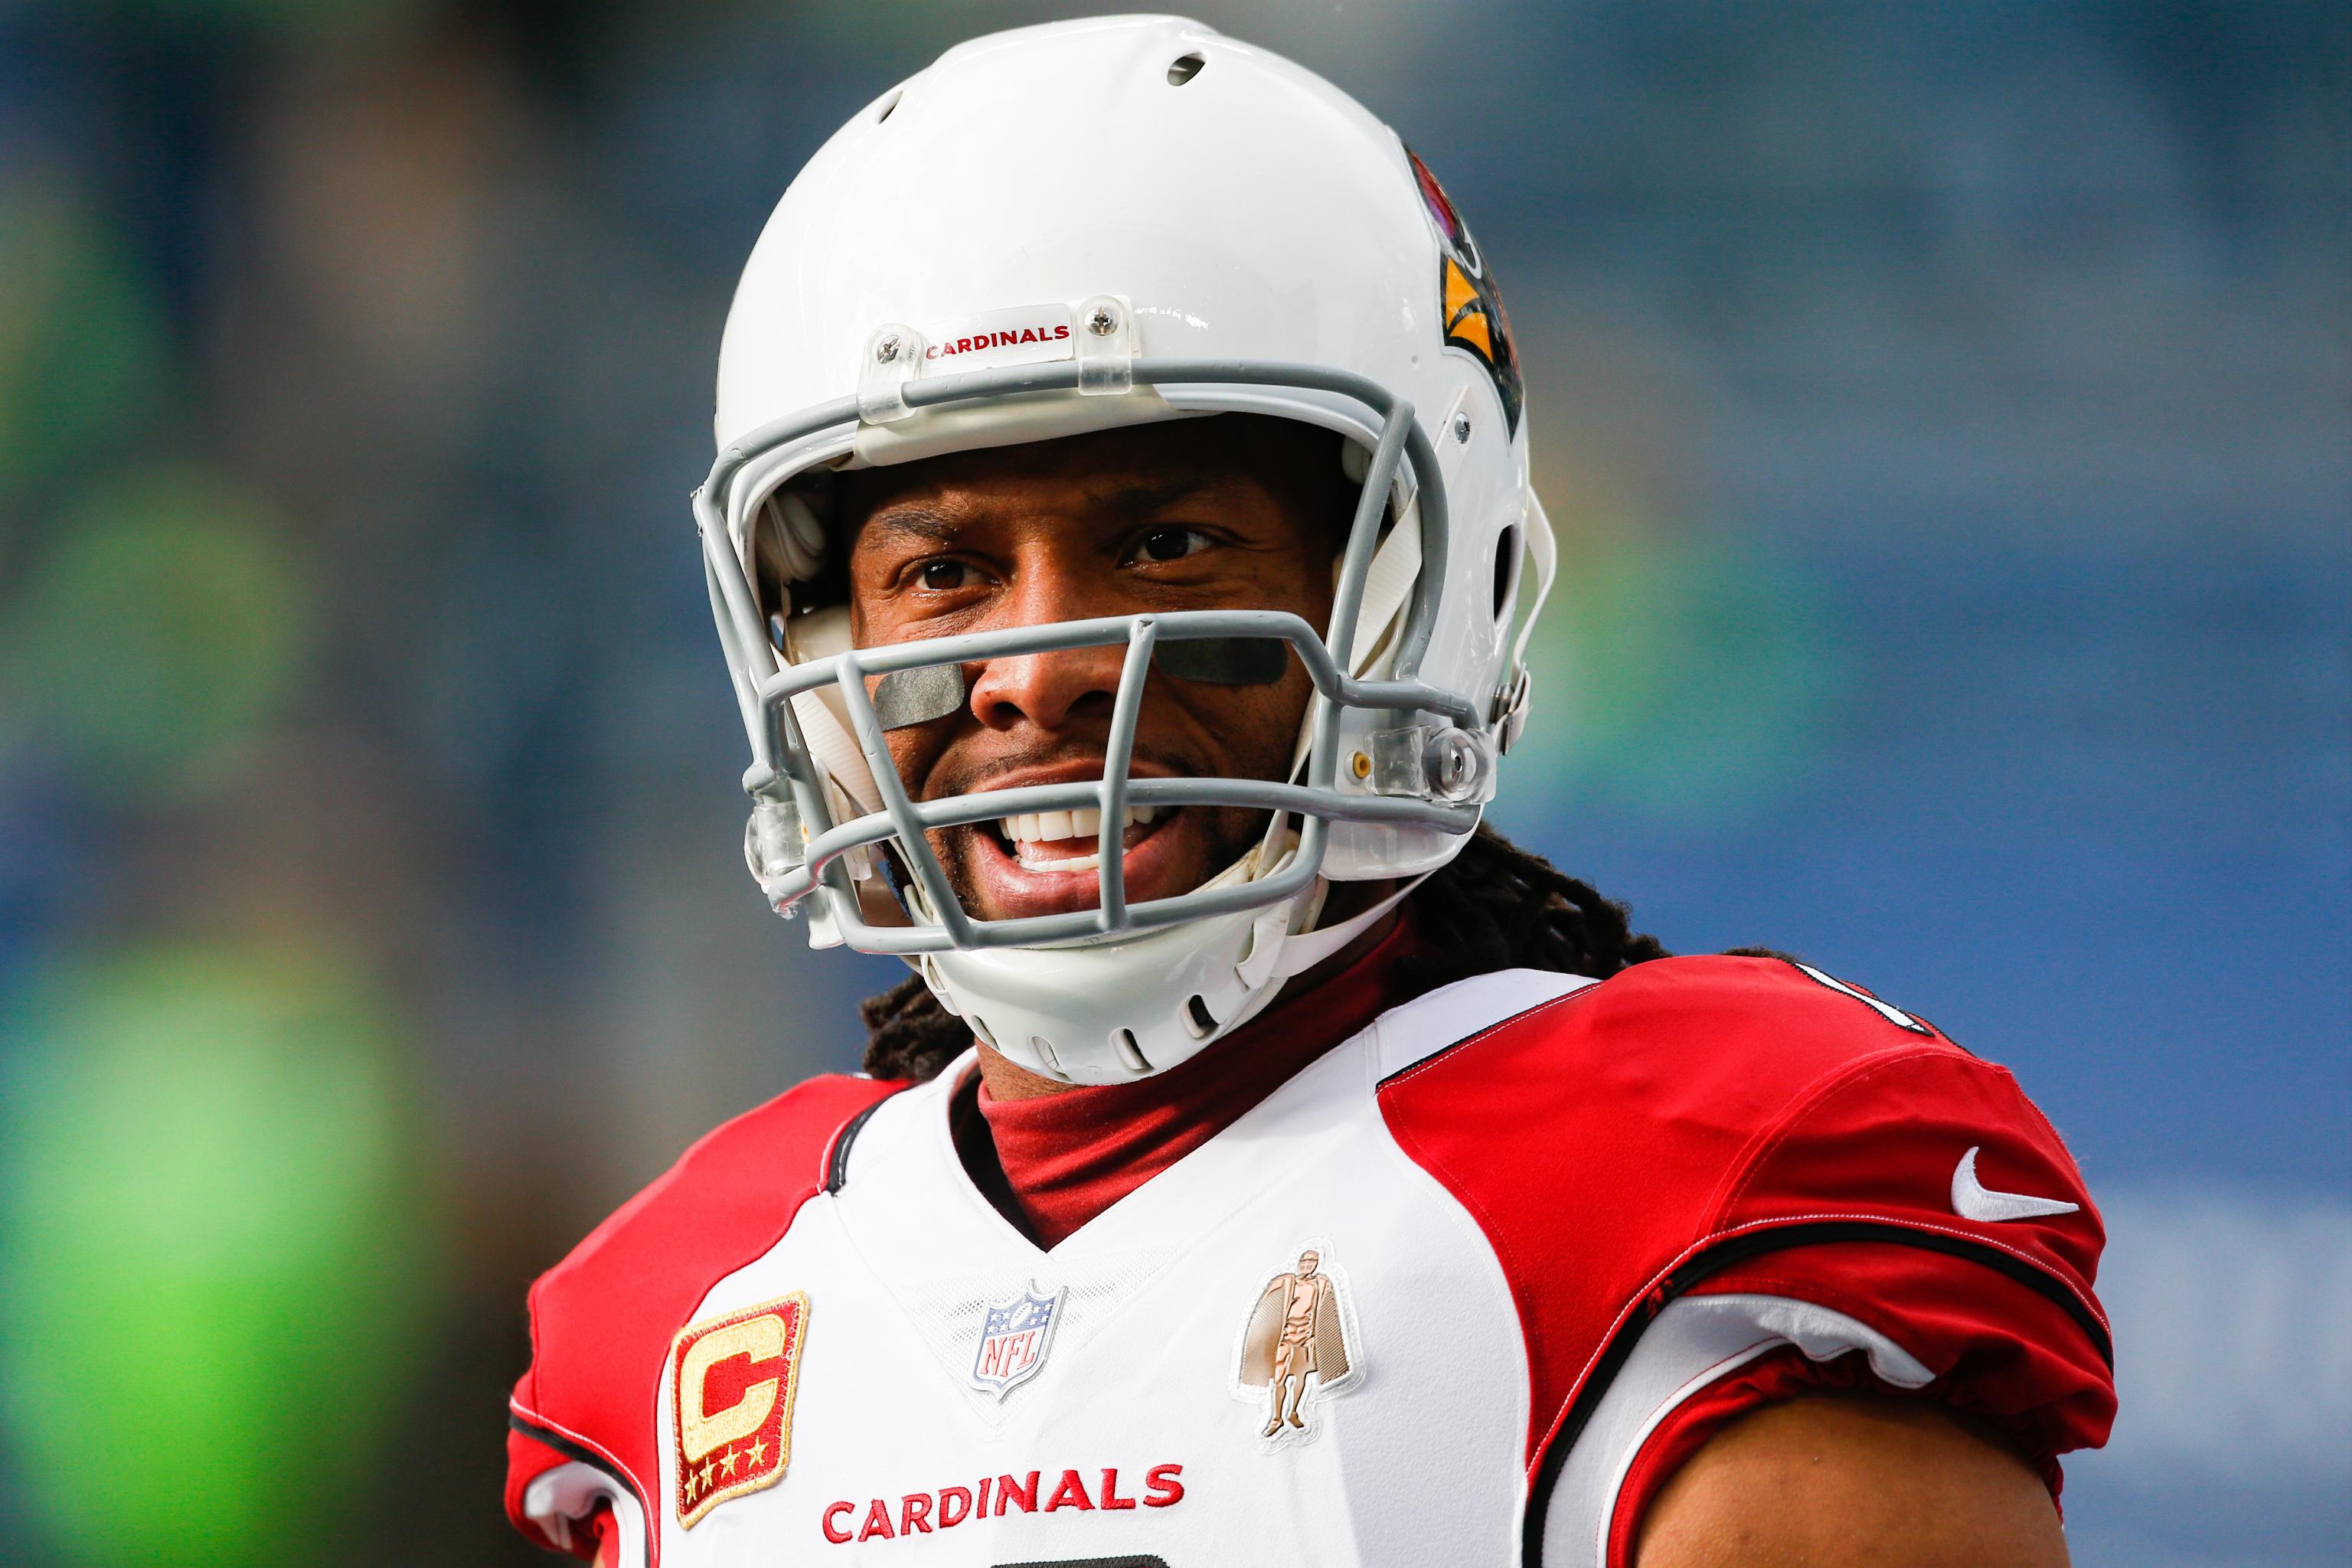 Cardinals WR Larry Fitzgerald will be back for an encore in 2019